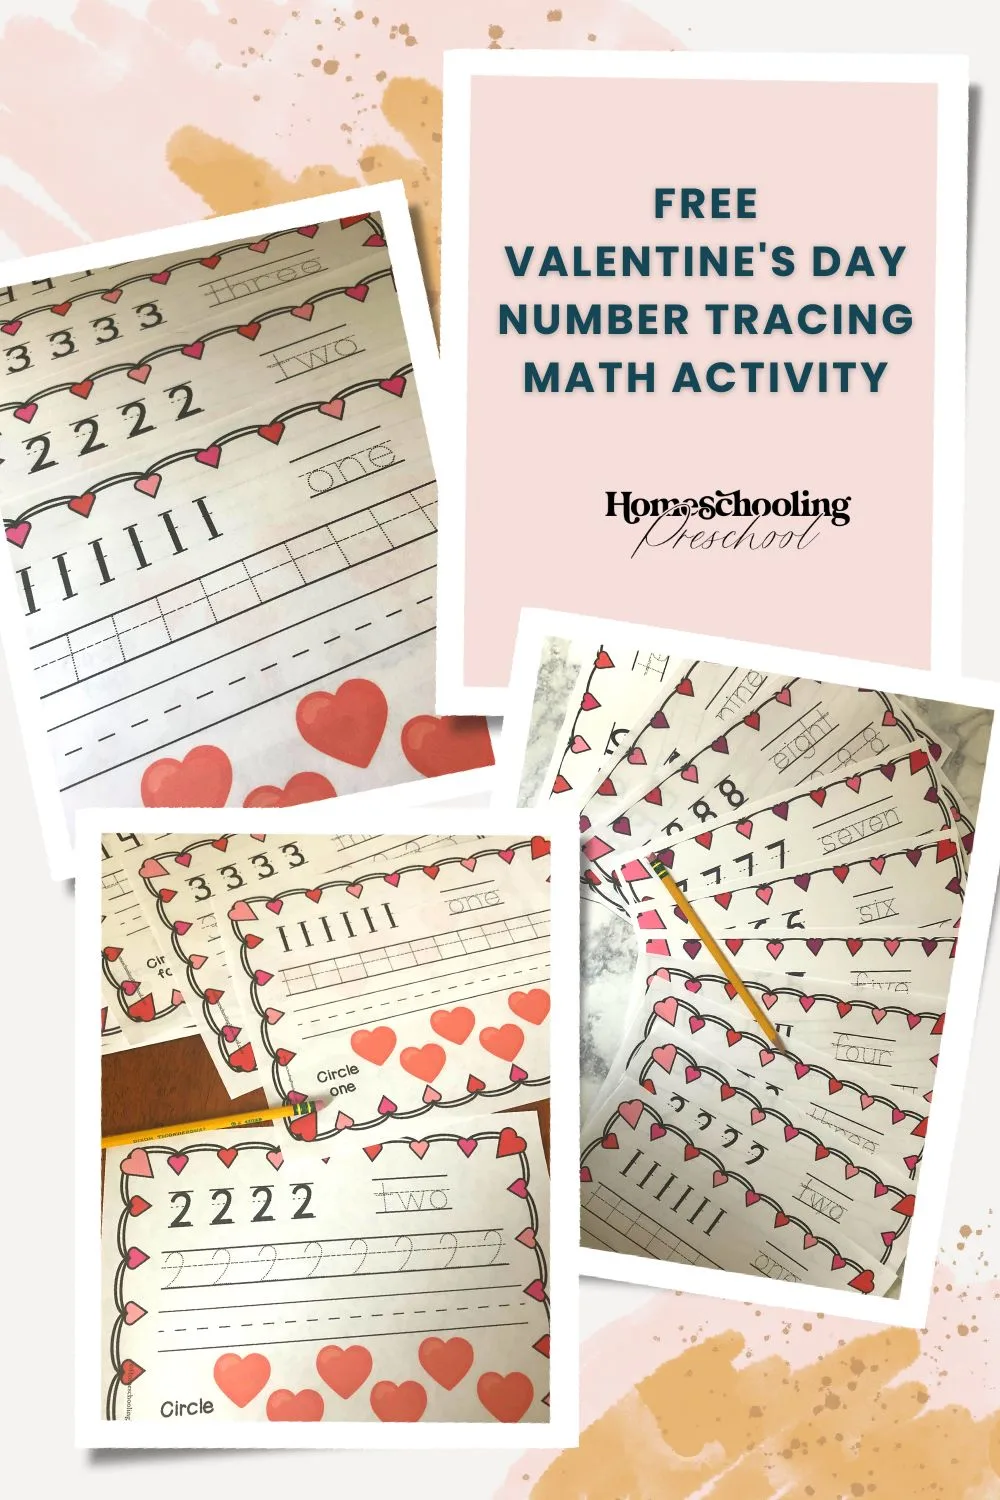 Free Valentine's Day Number Tracing Math Activity